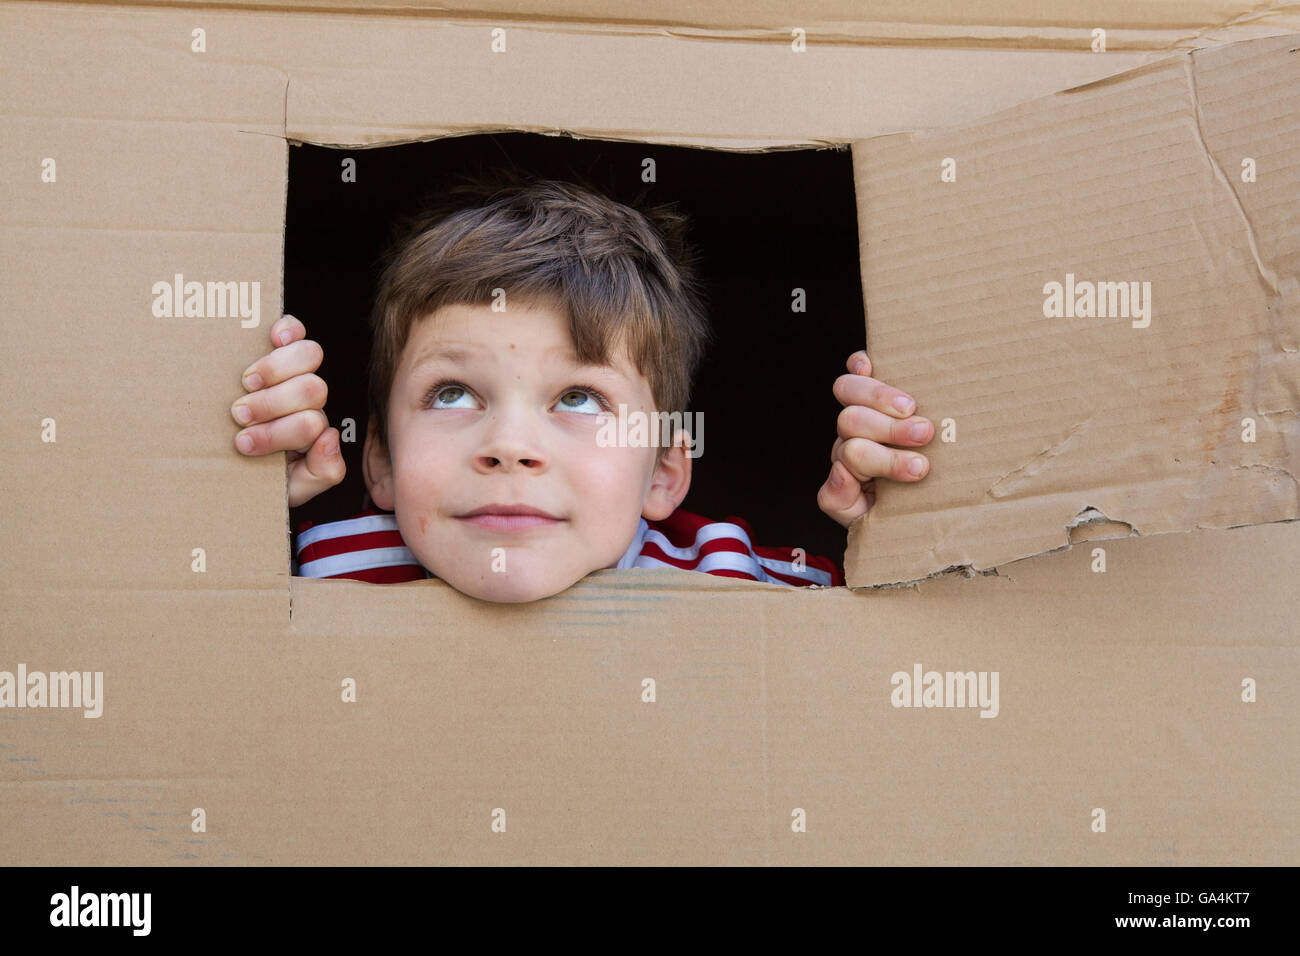 A 7 year old boy looks out of a window cut from a cardboard box Stock Photo